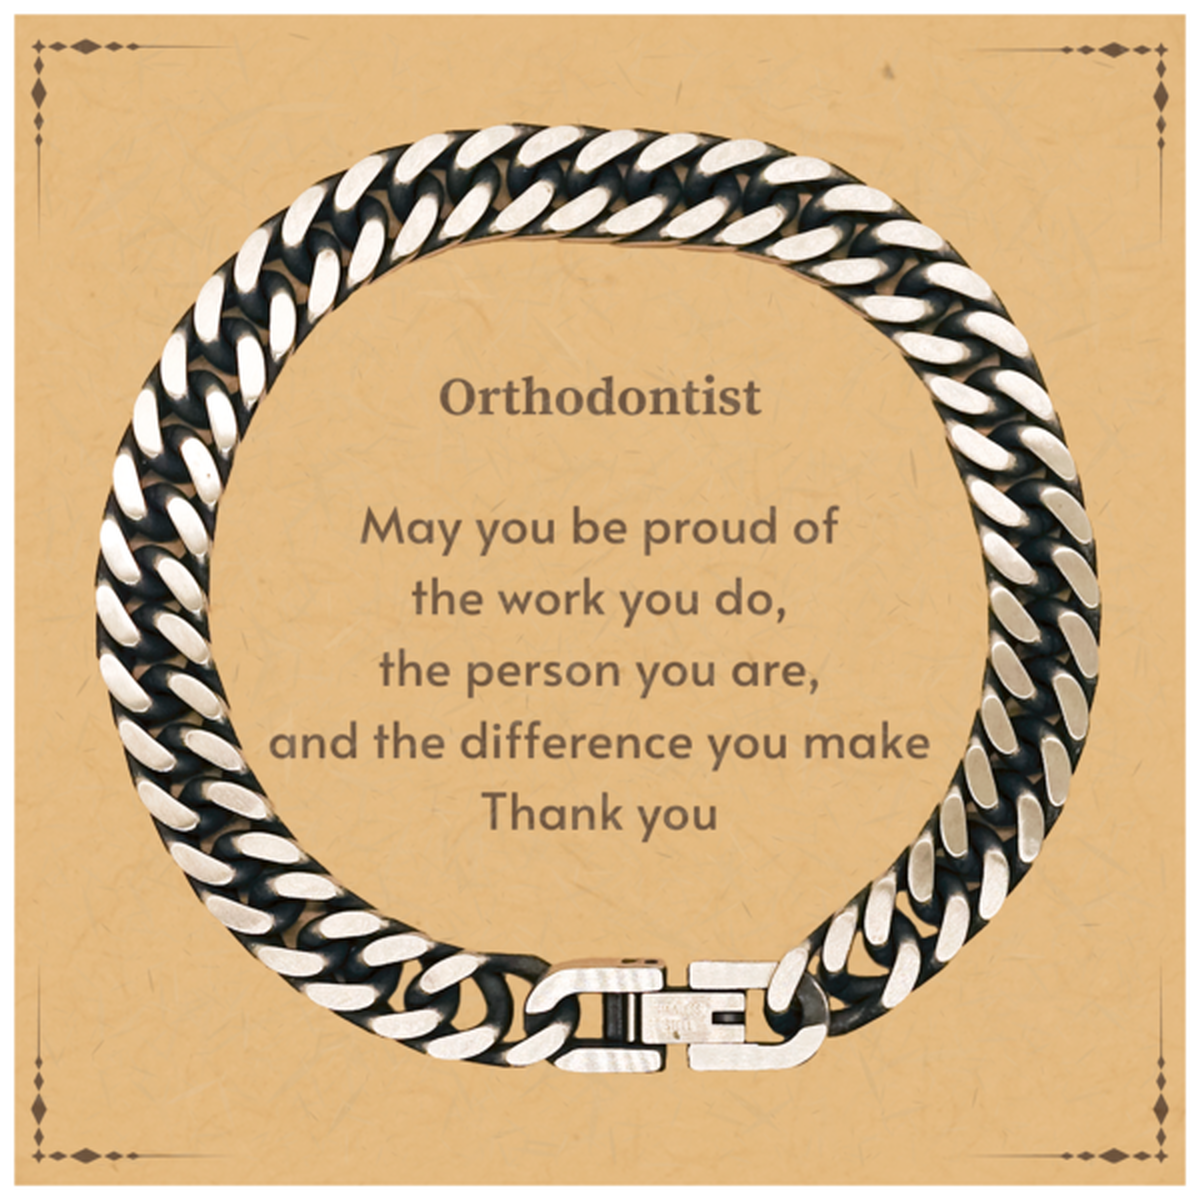 Heartwarming Cuban Link Chain Bracelet Retirement Coworkers Gifts for Orthodontist, Orthodontist May You be proud of the work you do, the person you are Gifts for Boss Men Women Friends